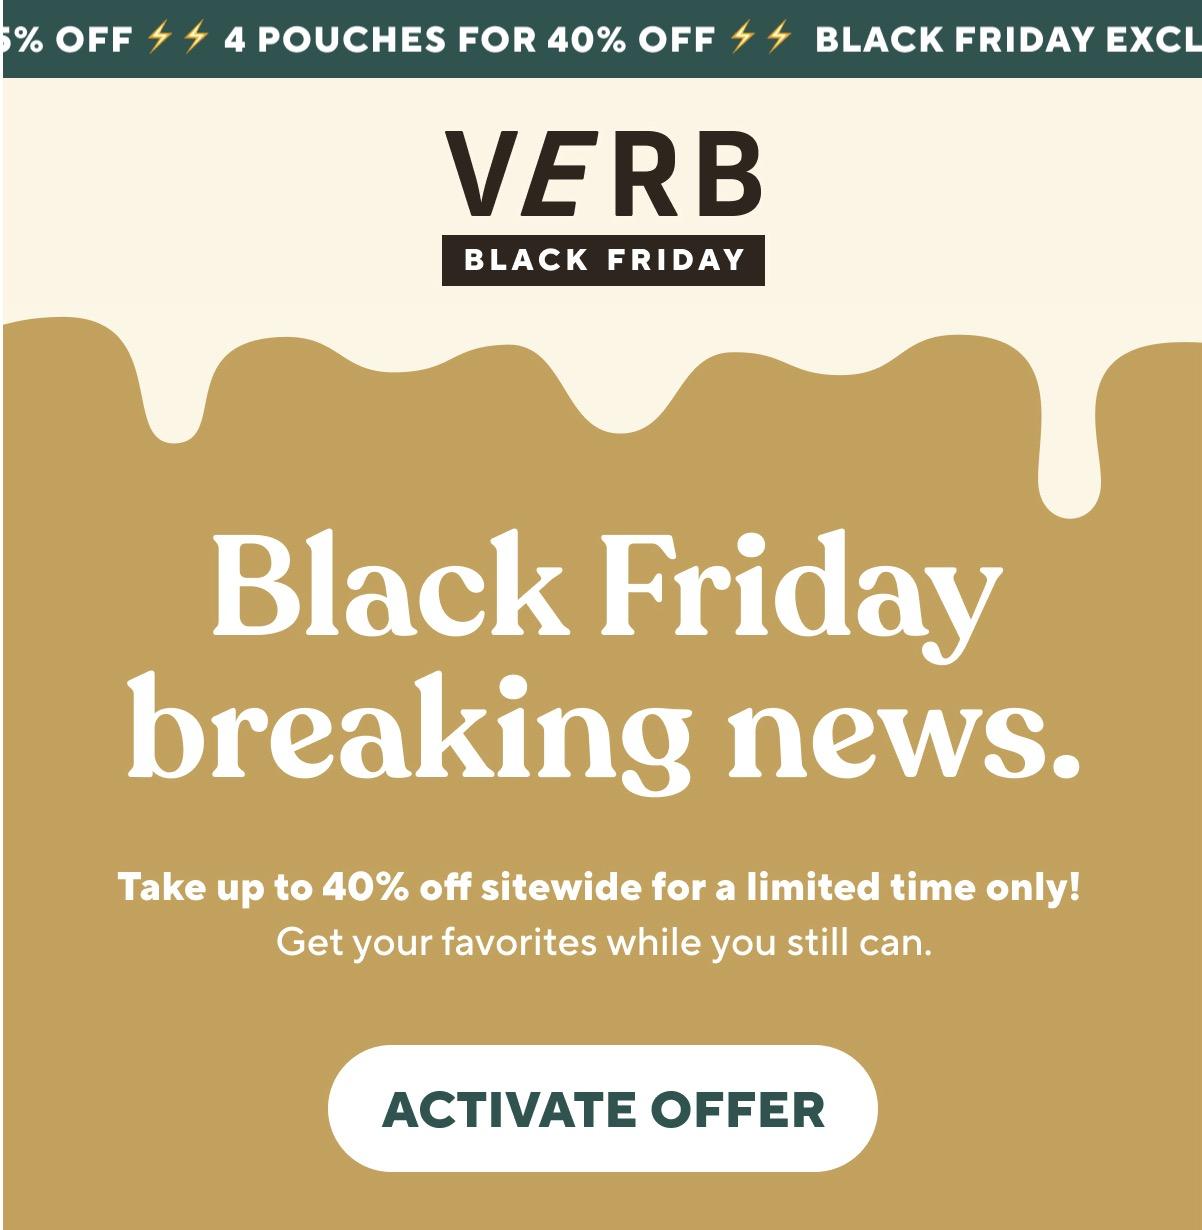 Verb Black Friday Sale – Save Up to 40% Off!